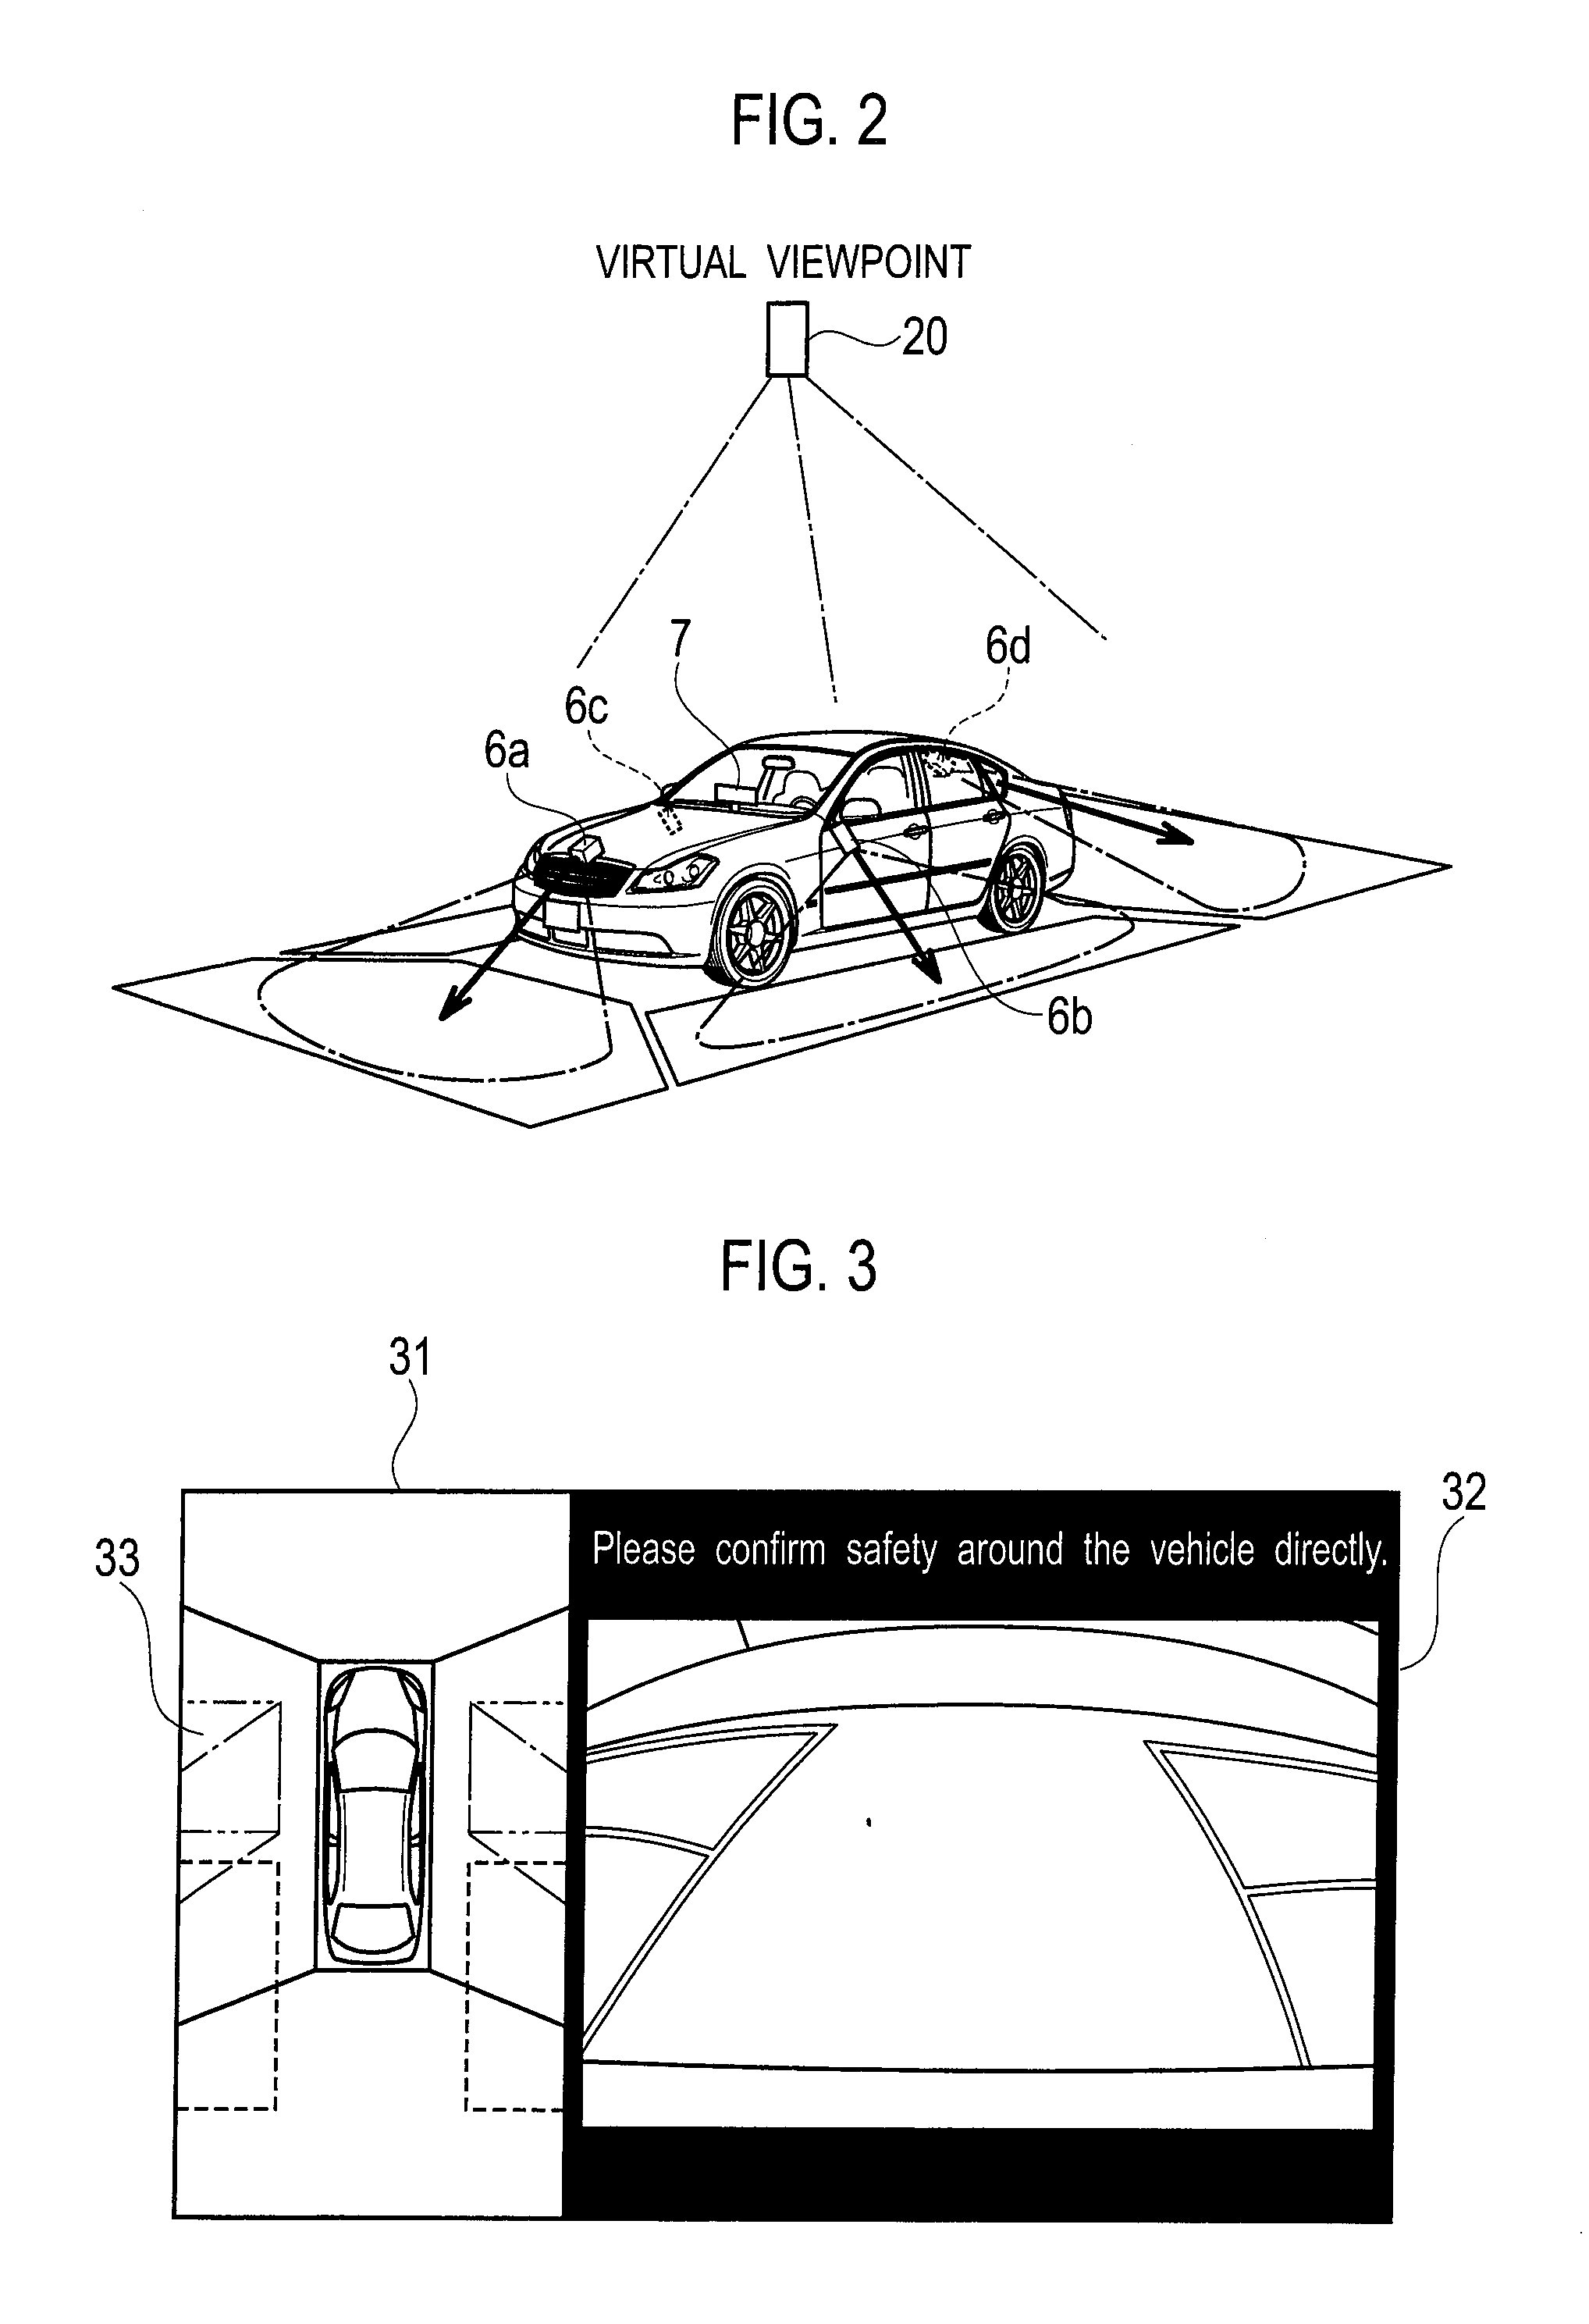 Parking mode selection apparatus and method